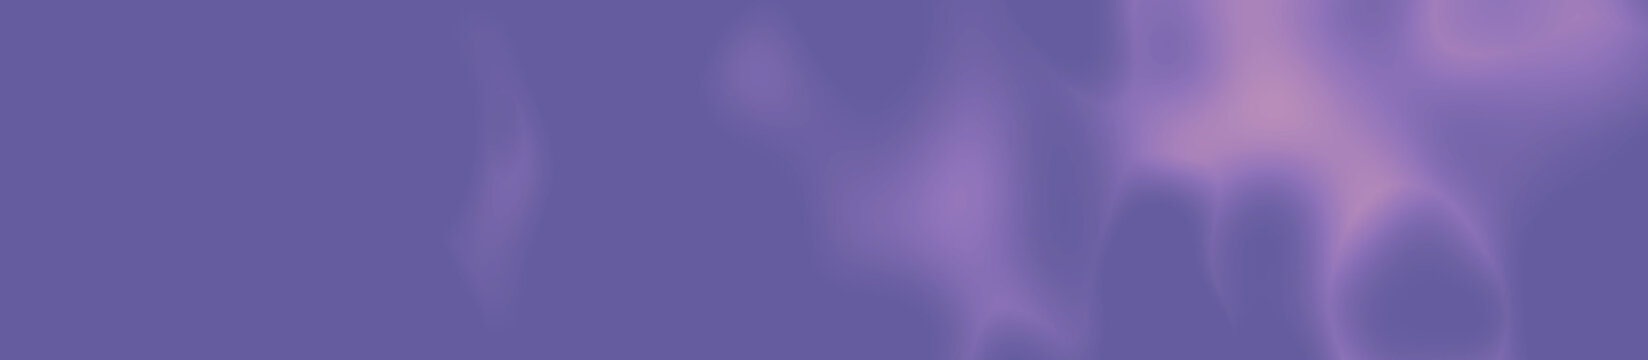 abstract blurred violet, purple and yellow colors background for design © Tamara